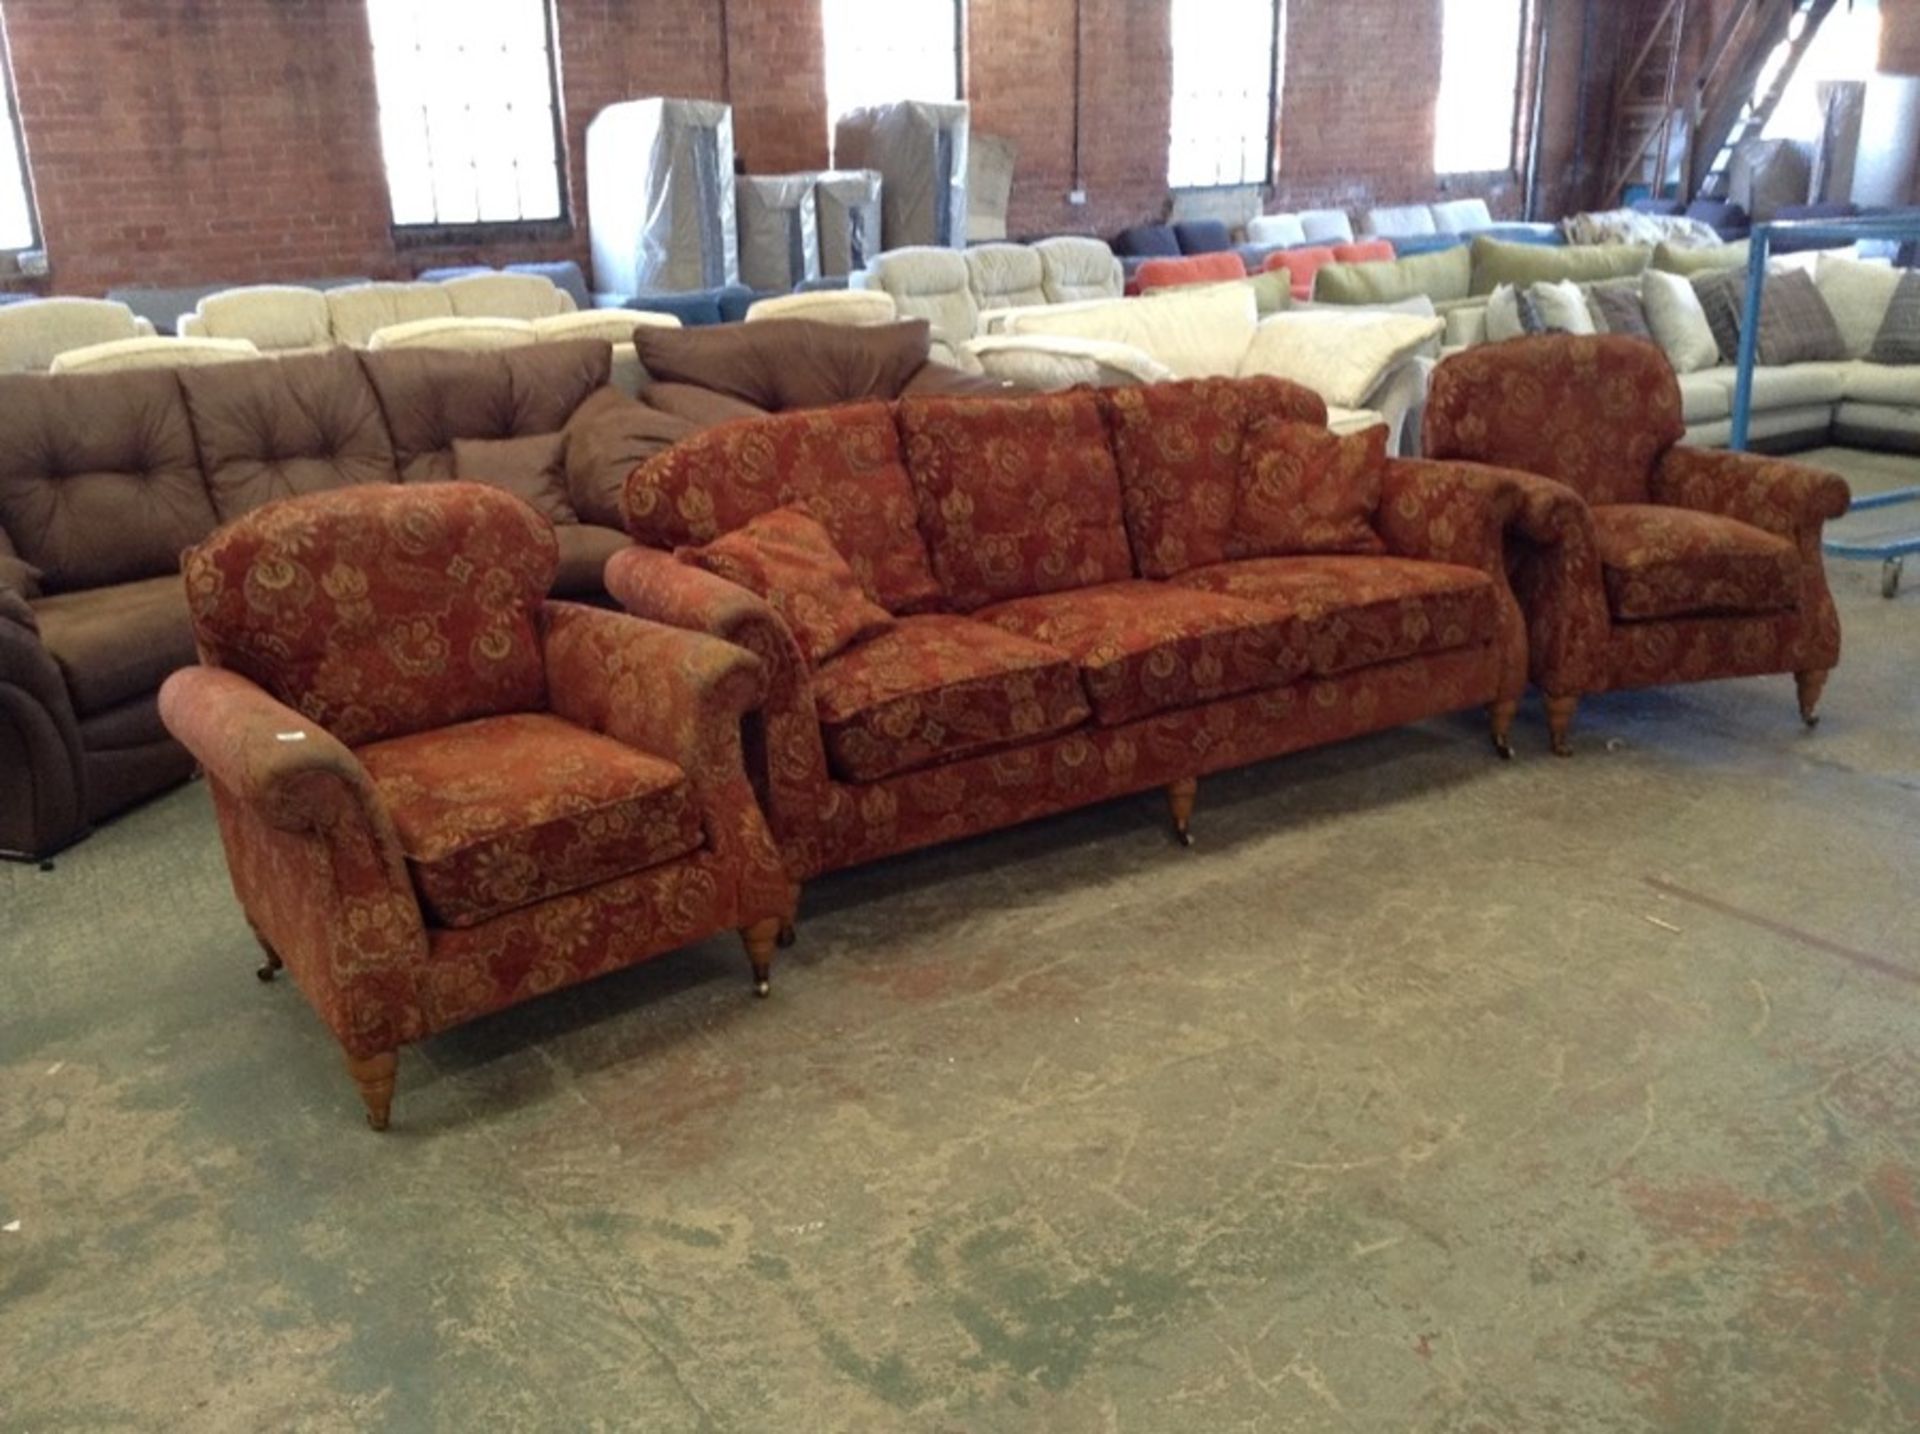 RED & GOLD 3 SEATER & X2 CHAIRS (RIPS, WORN)